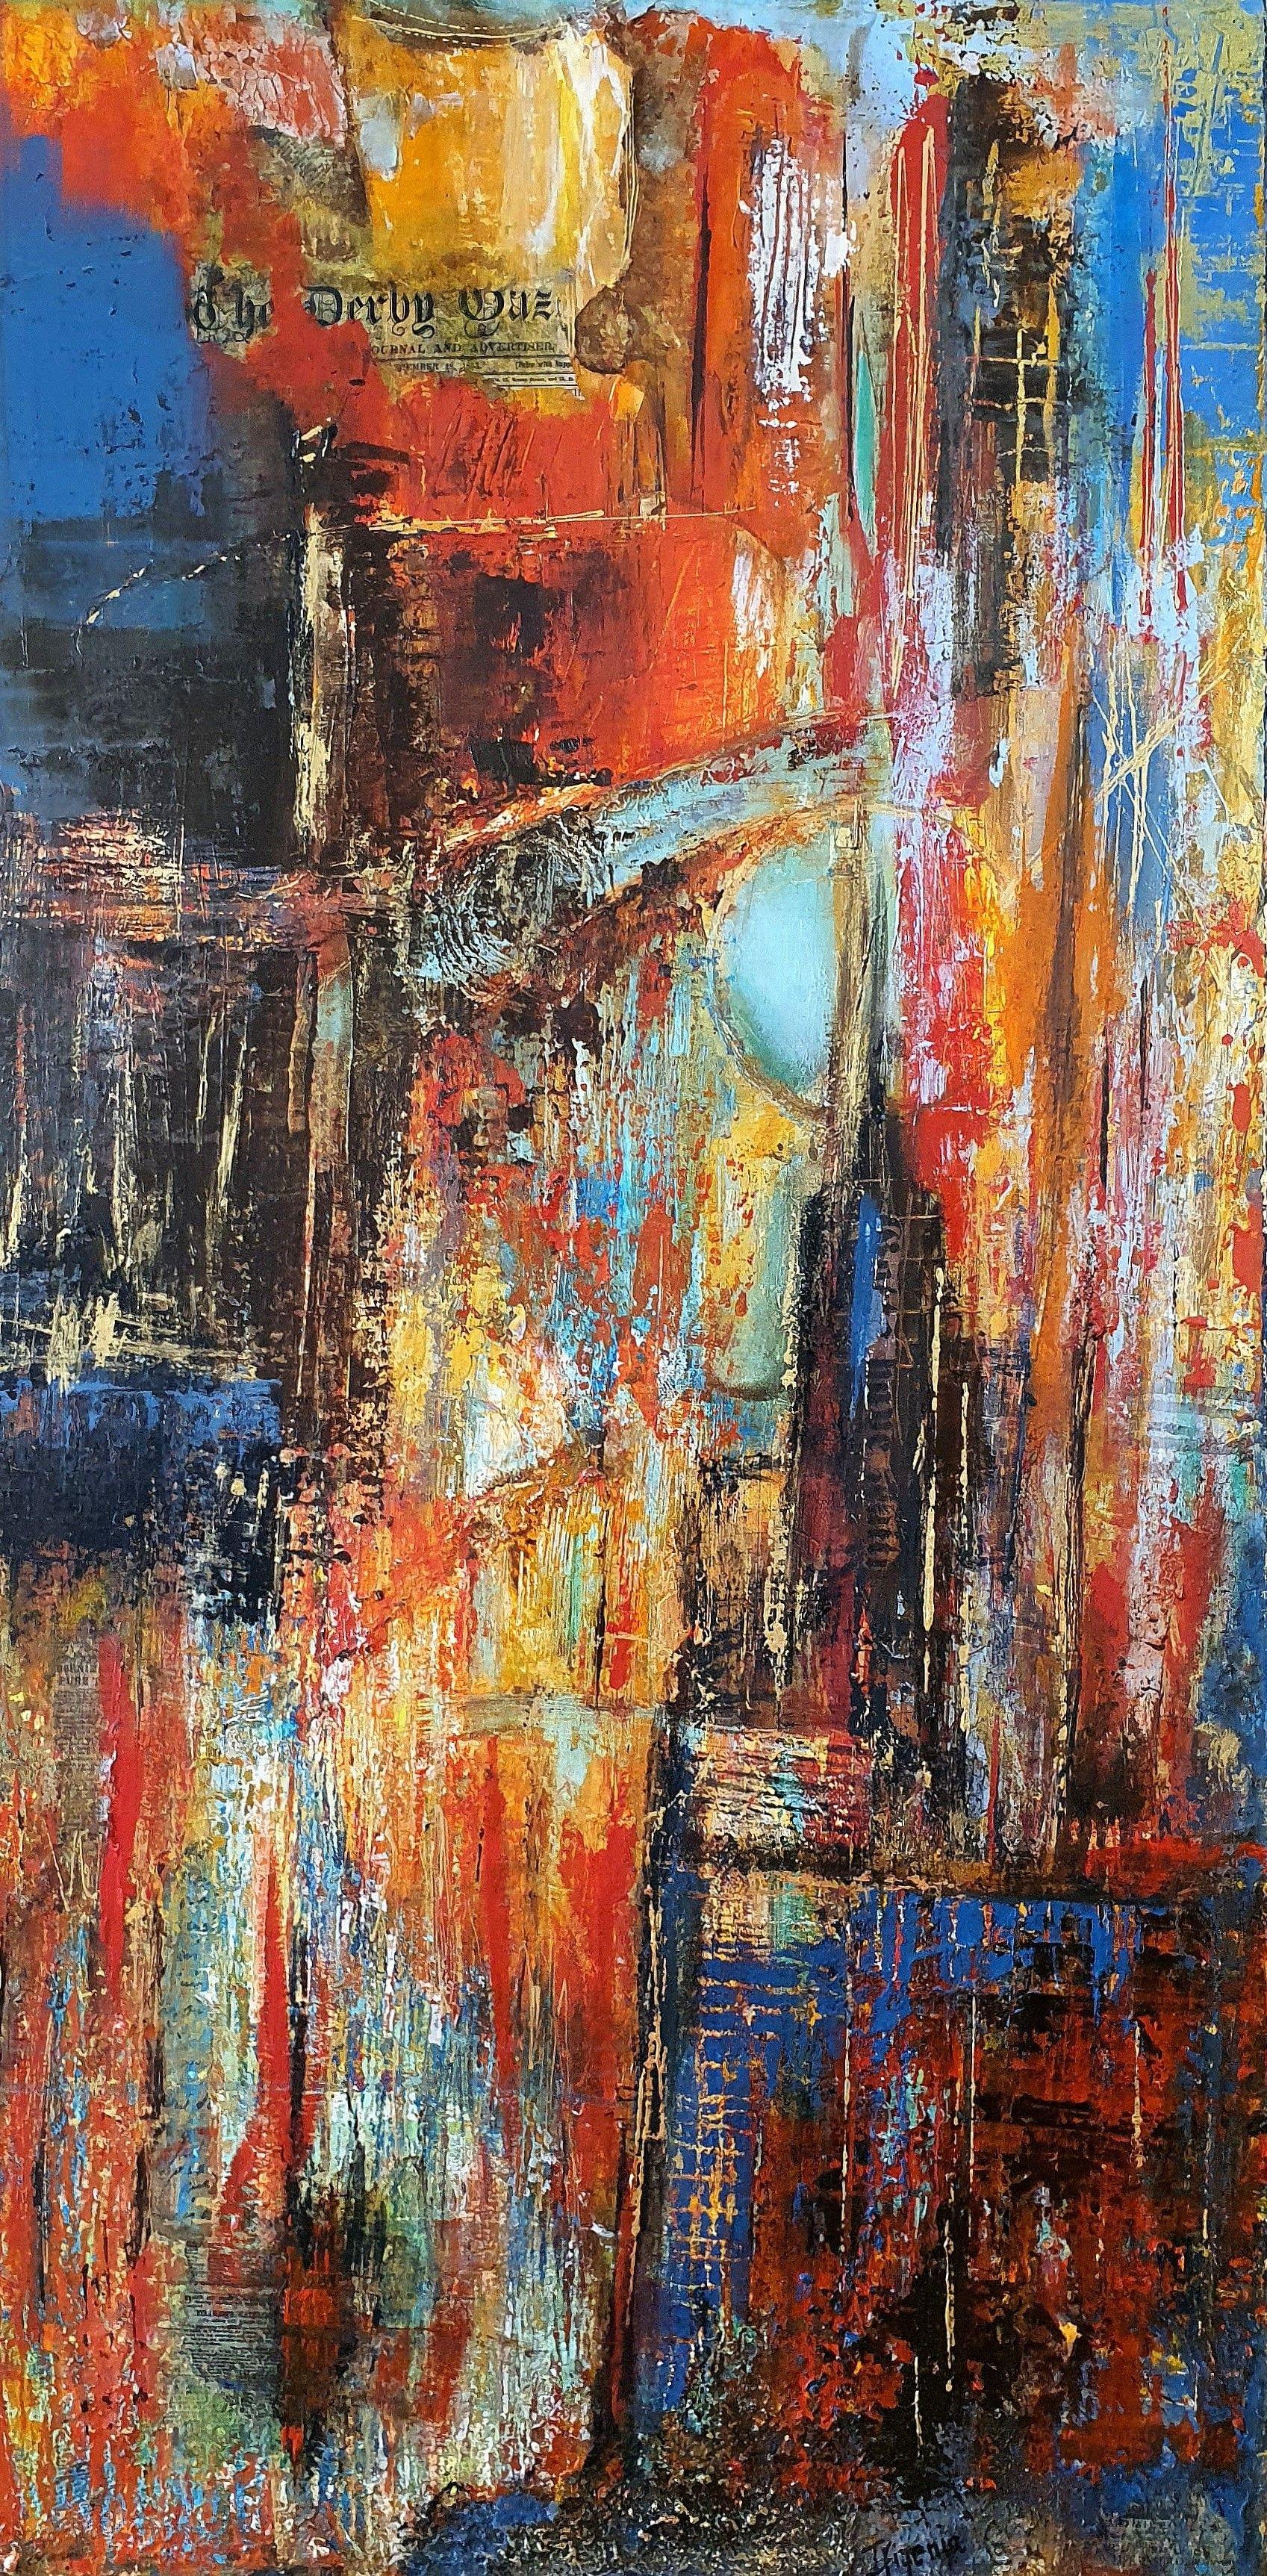 Ifigenia christodoulidou Abstract Painting - "City lights", Painting, Acrylic on Canvas